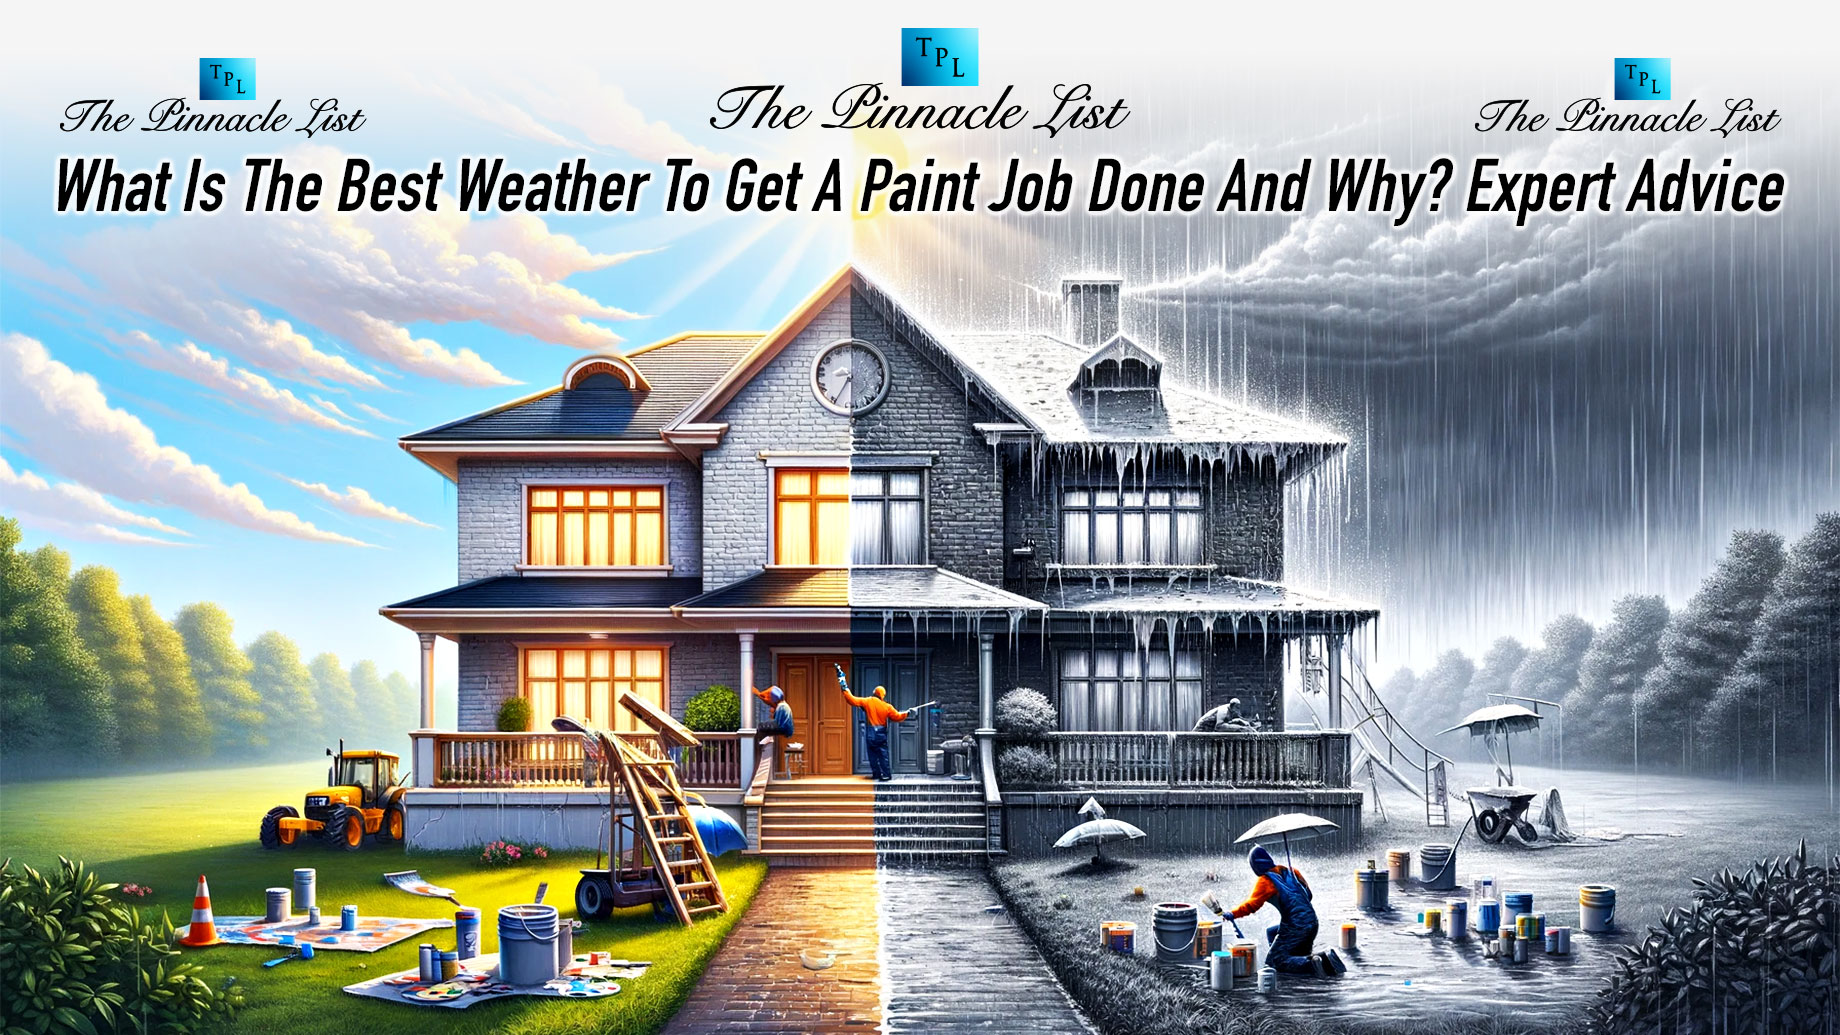 What Is The Best Weather To Get A Paint Job Done And Why? Expert Advice